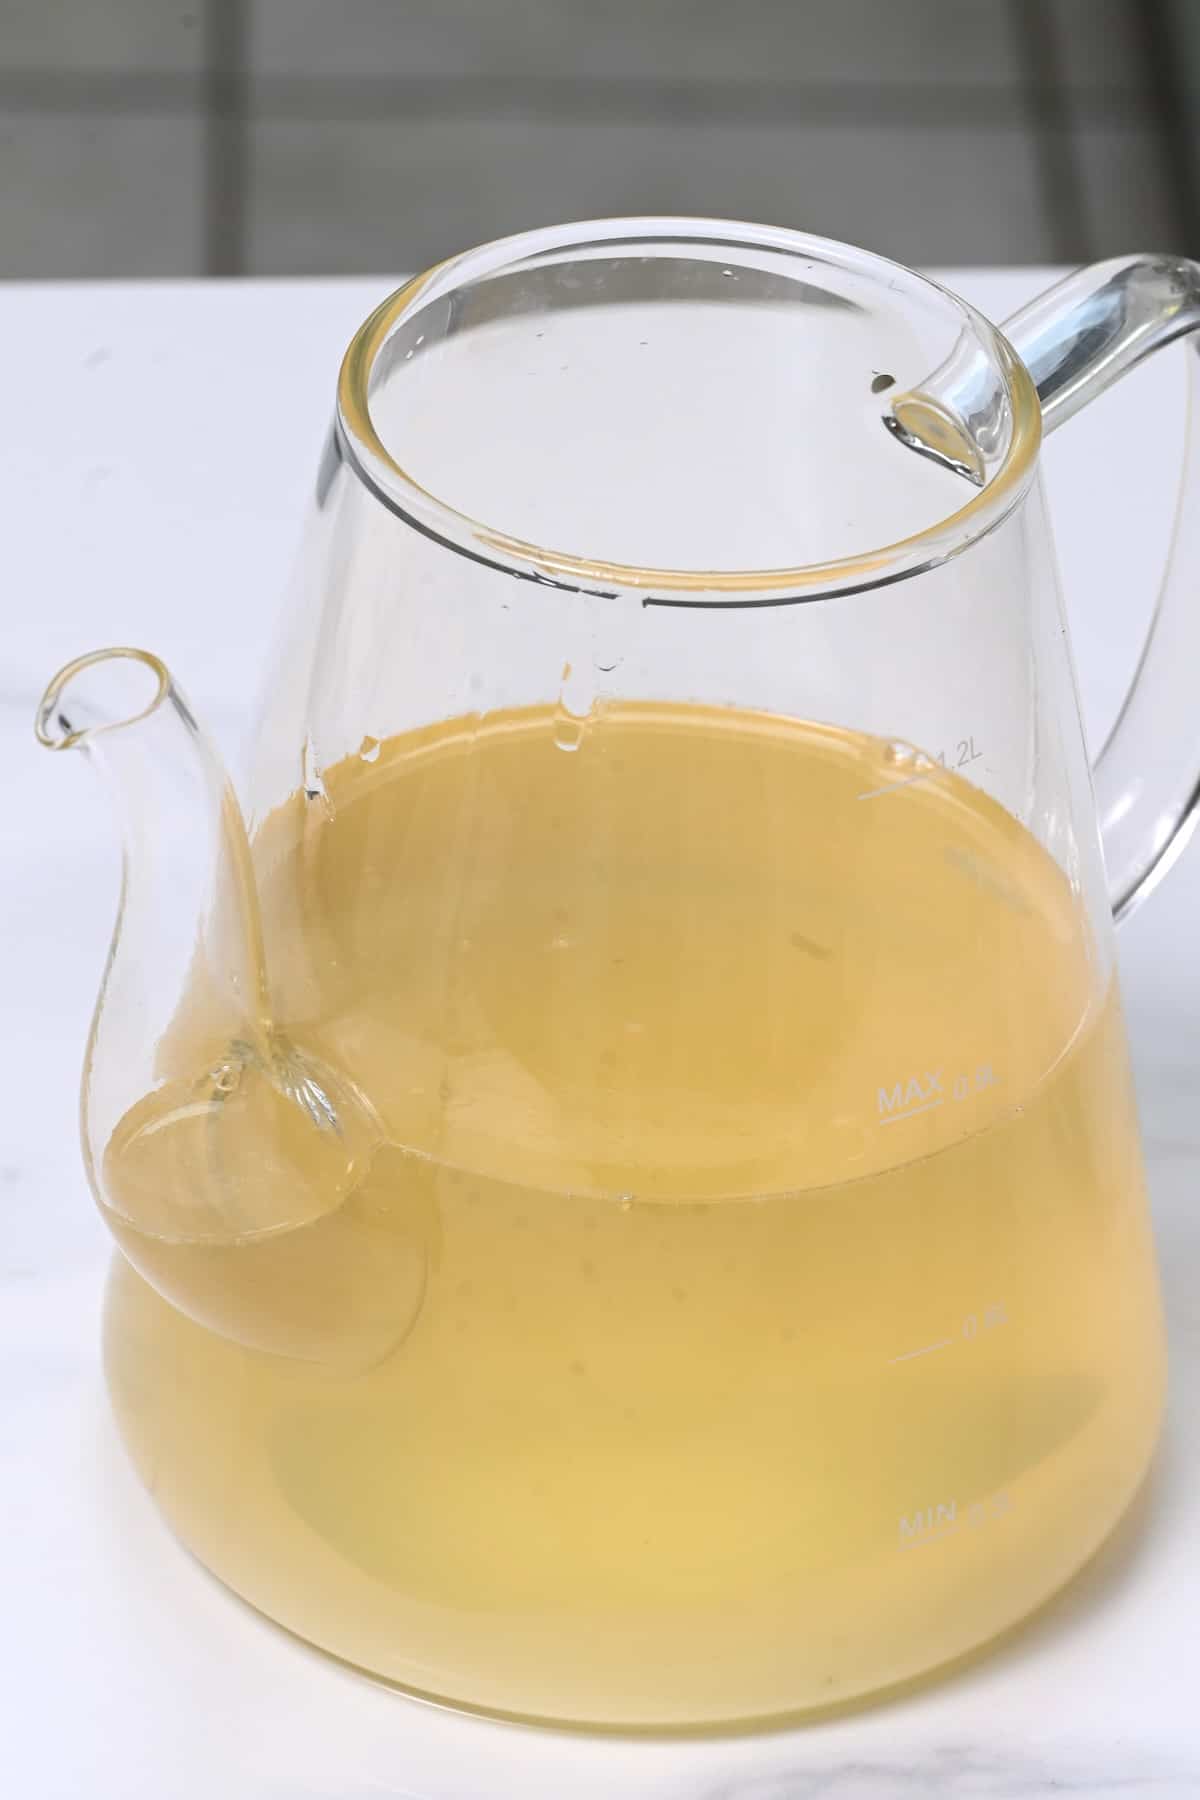 Homemade ginger ale in a large pitcher